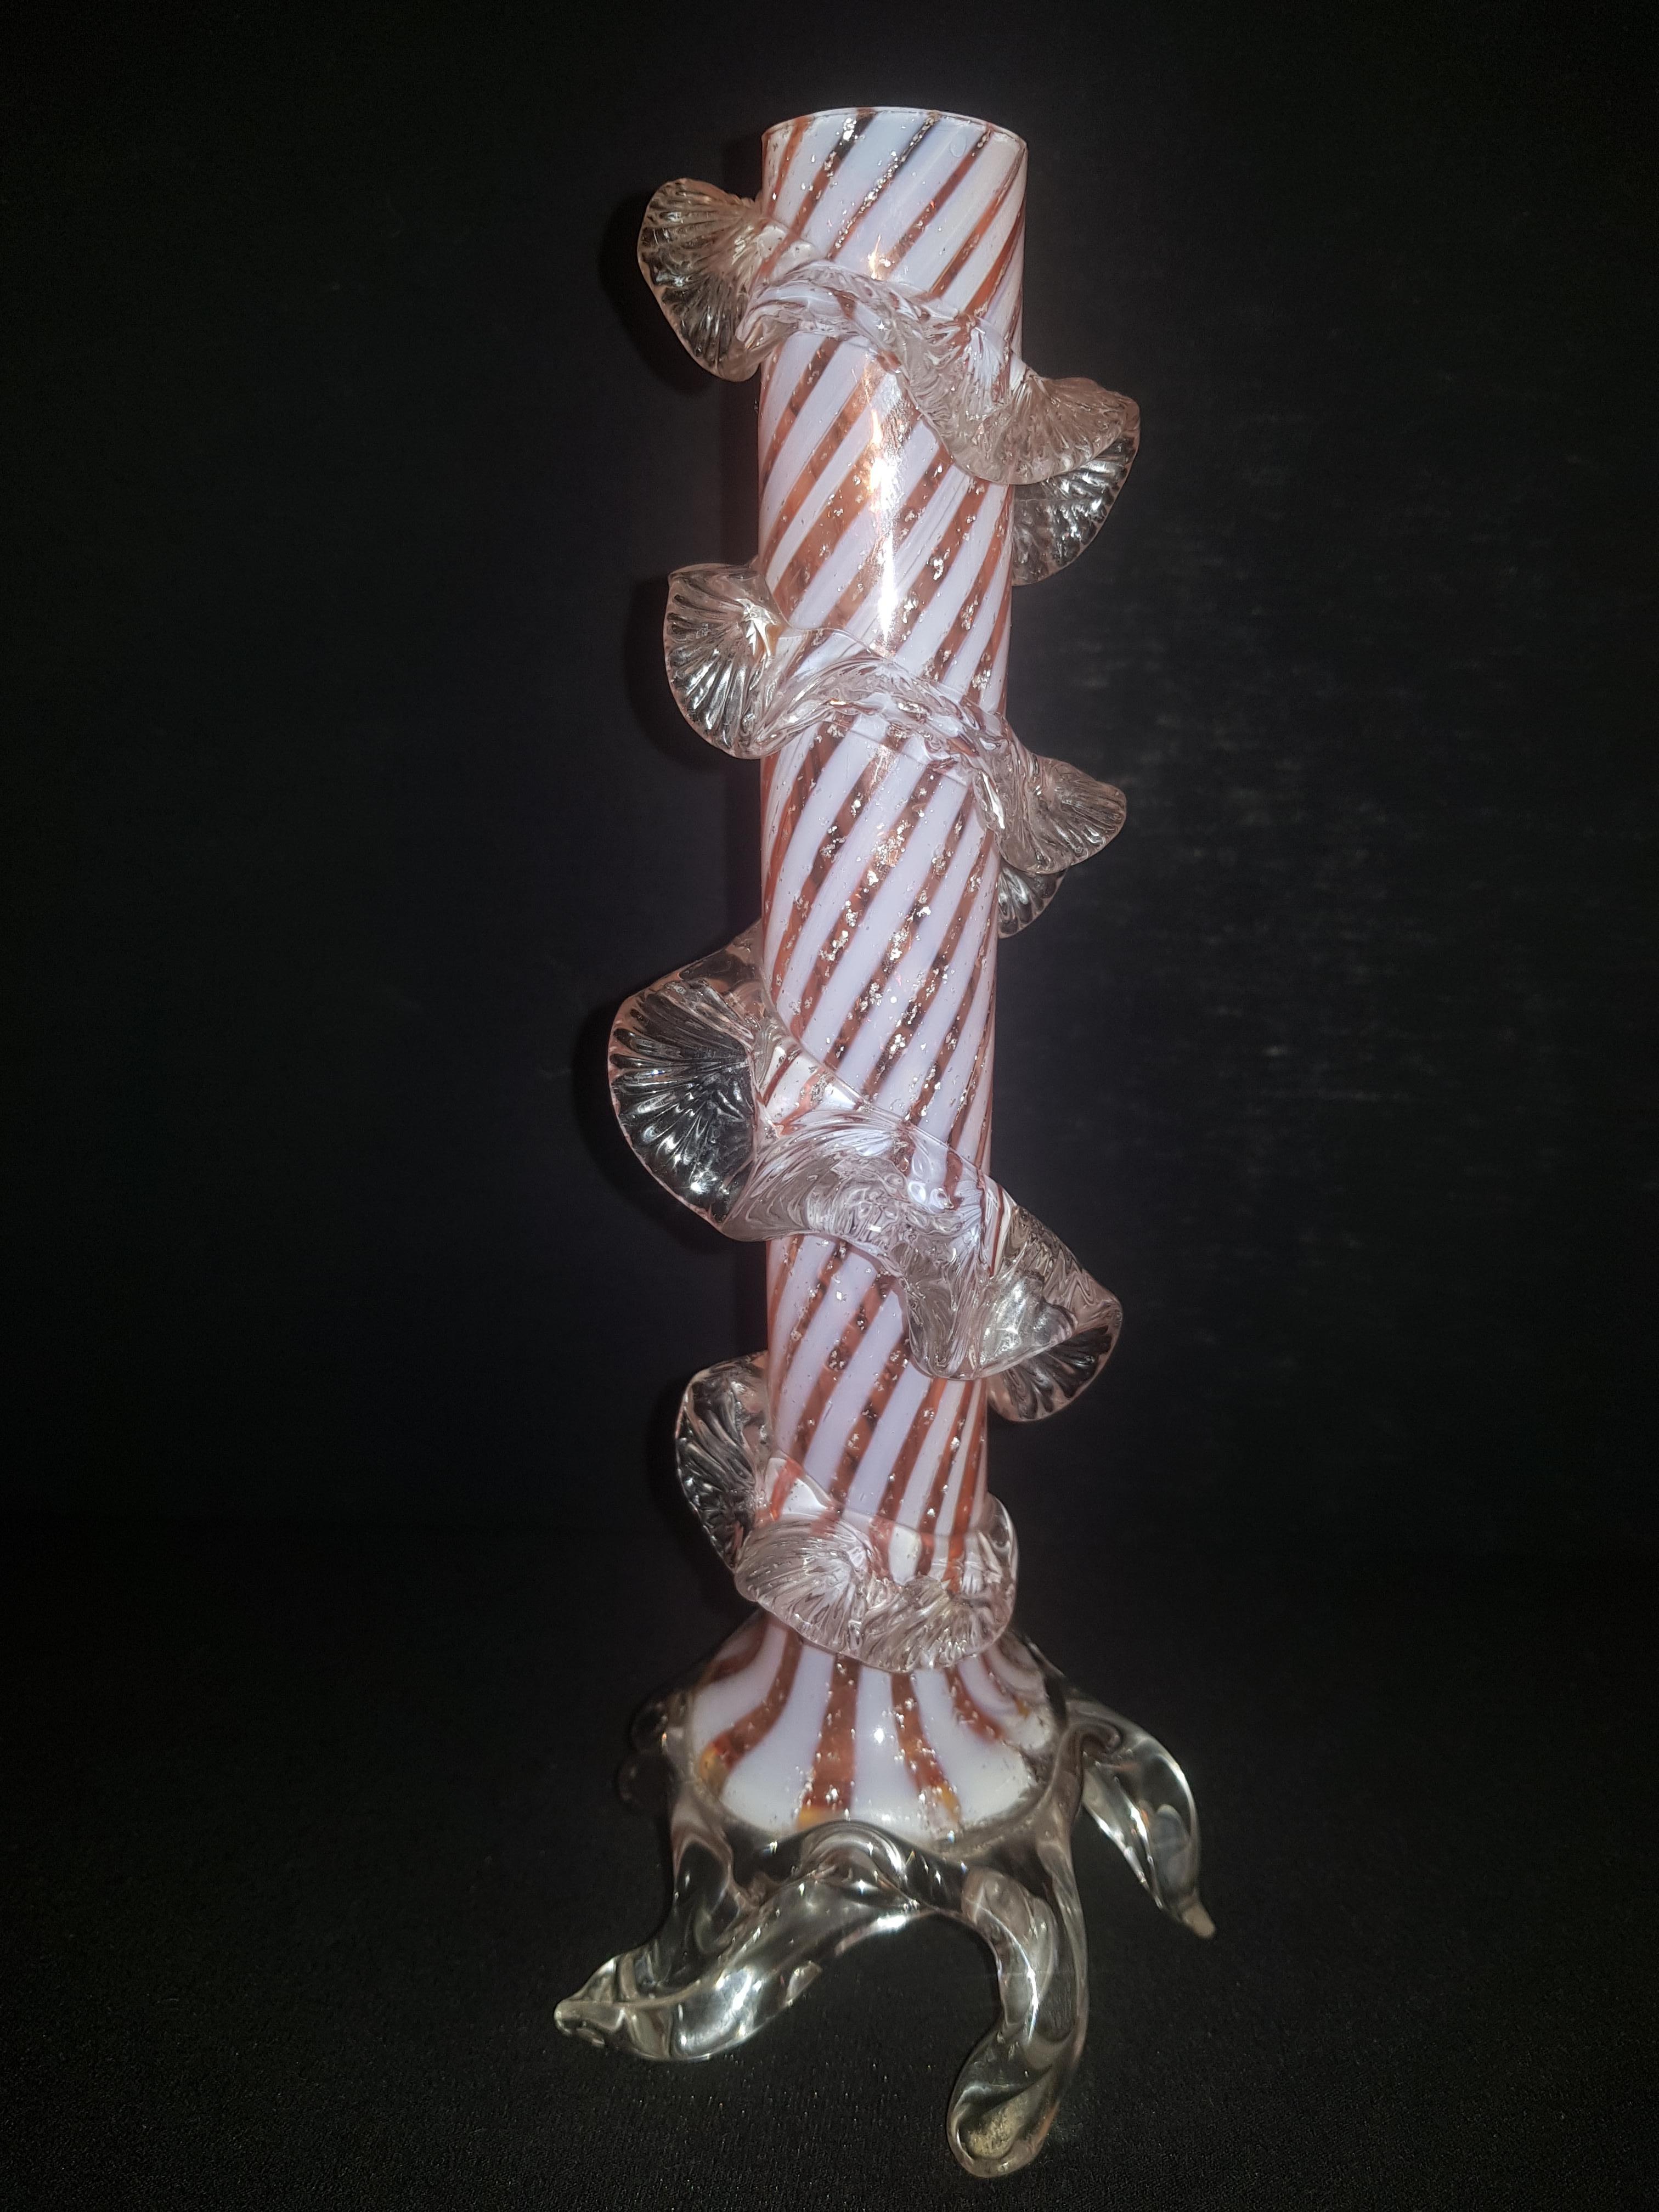 Beautiful antique bohemian swirled glass candle holder in red and white with silver leaf by Franz Welz, years 1900-1910. In excellent condition.